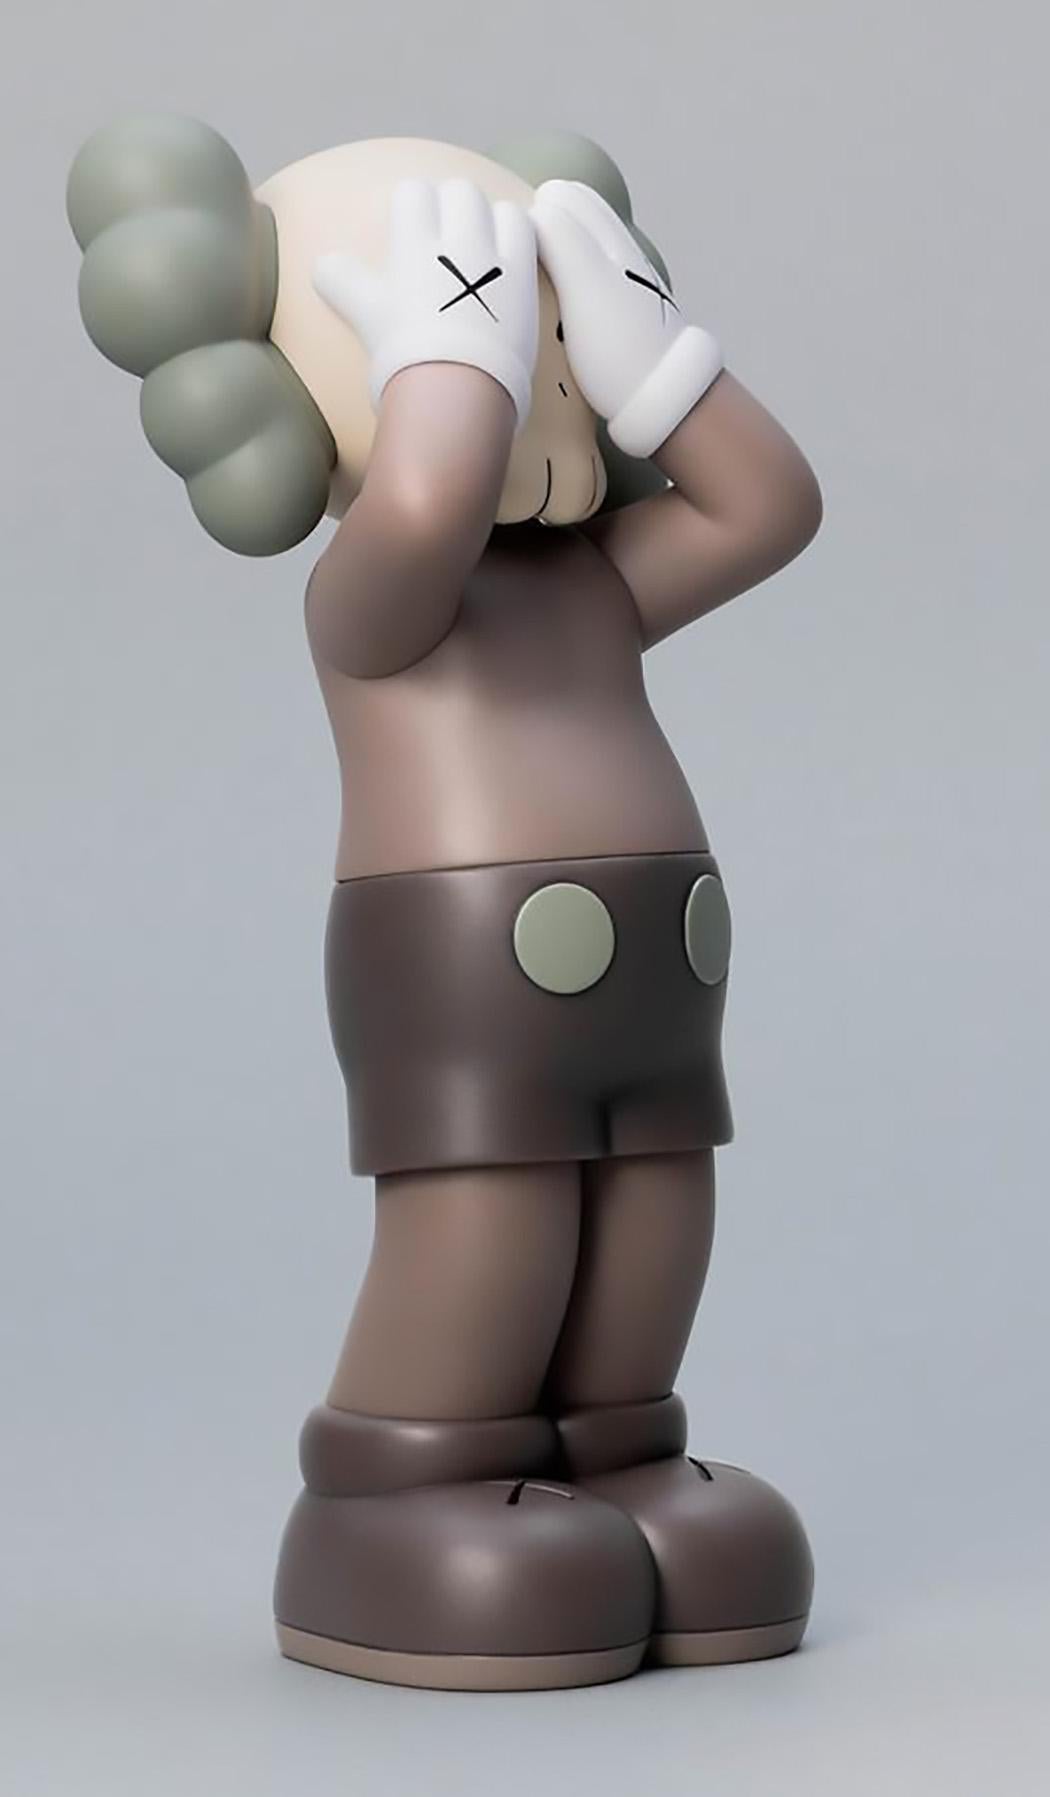 KAWS: HOLIDAY United Kingdom Brown (KAWS UK): 
KAWS' signature character COMPANION presented in an upright standing position with its eyes covered. New in their original packaging - published by All Rights Reserved to commemorate the debut of KAWS’